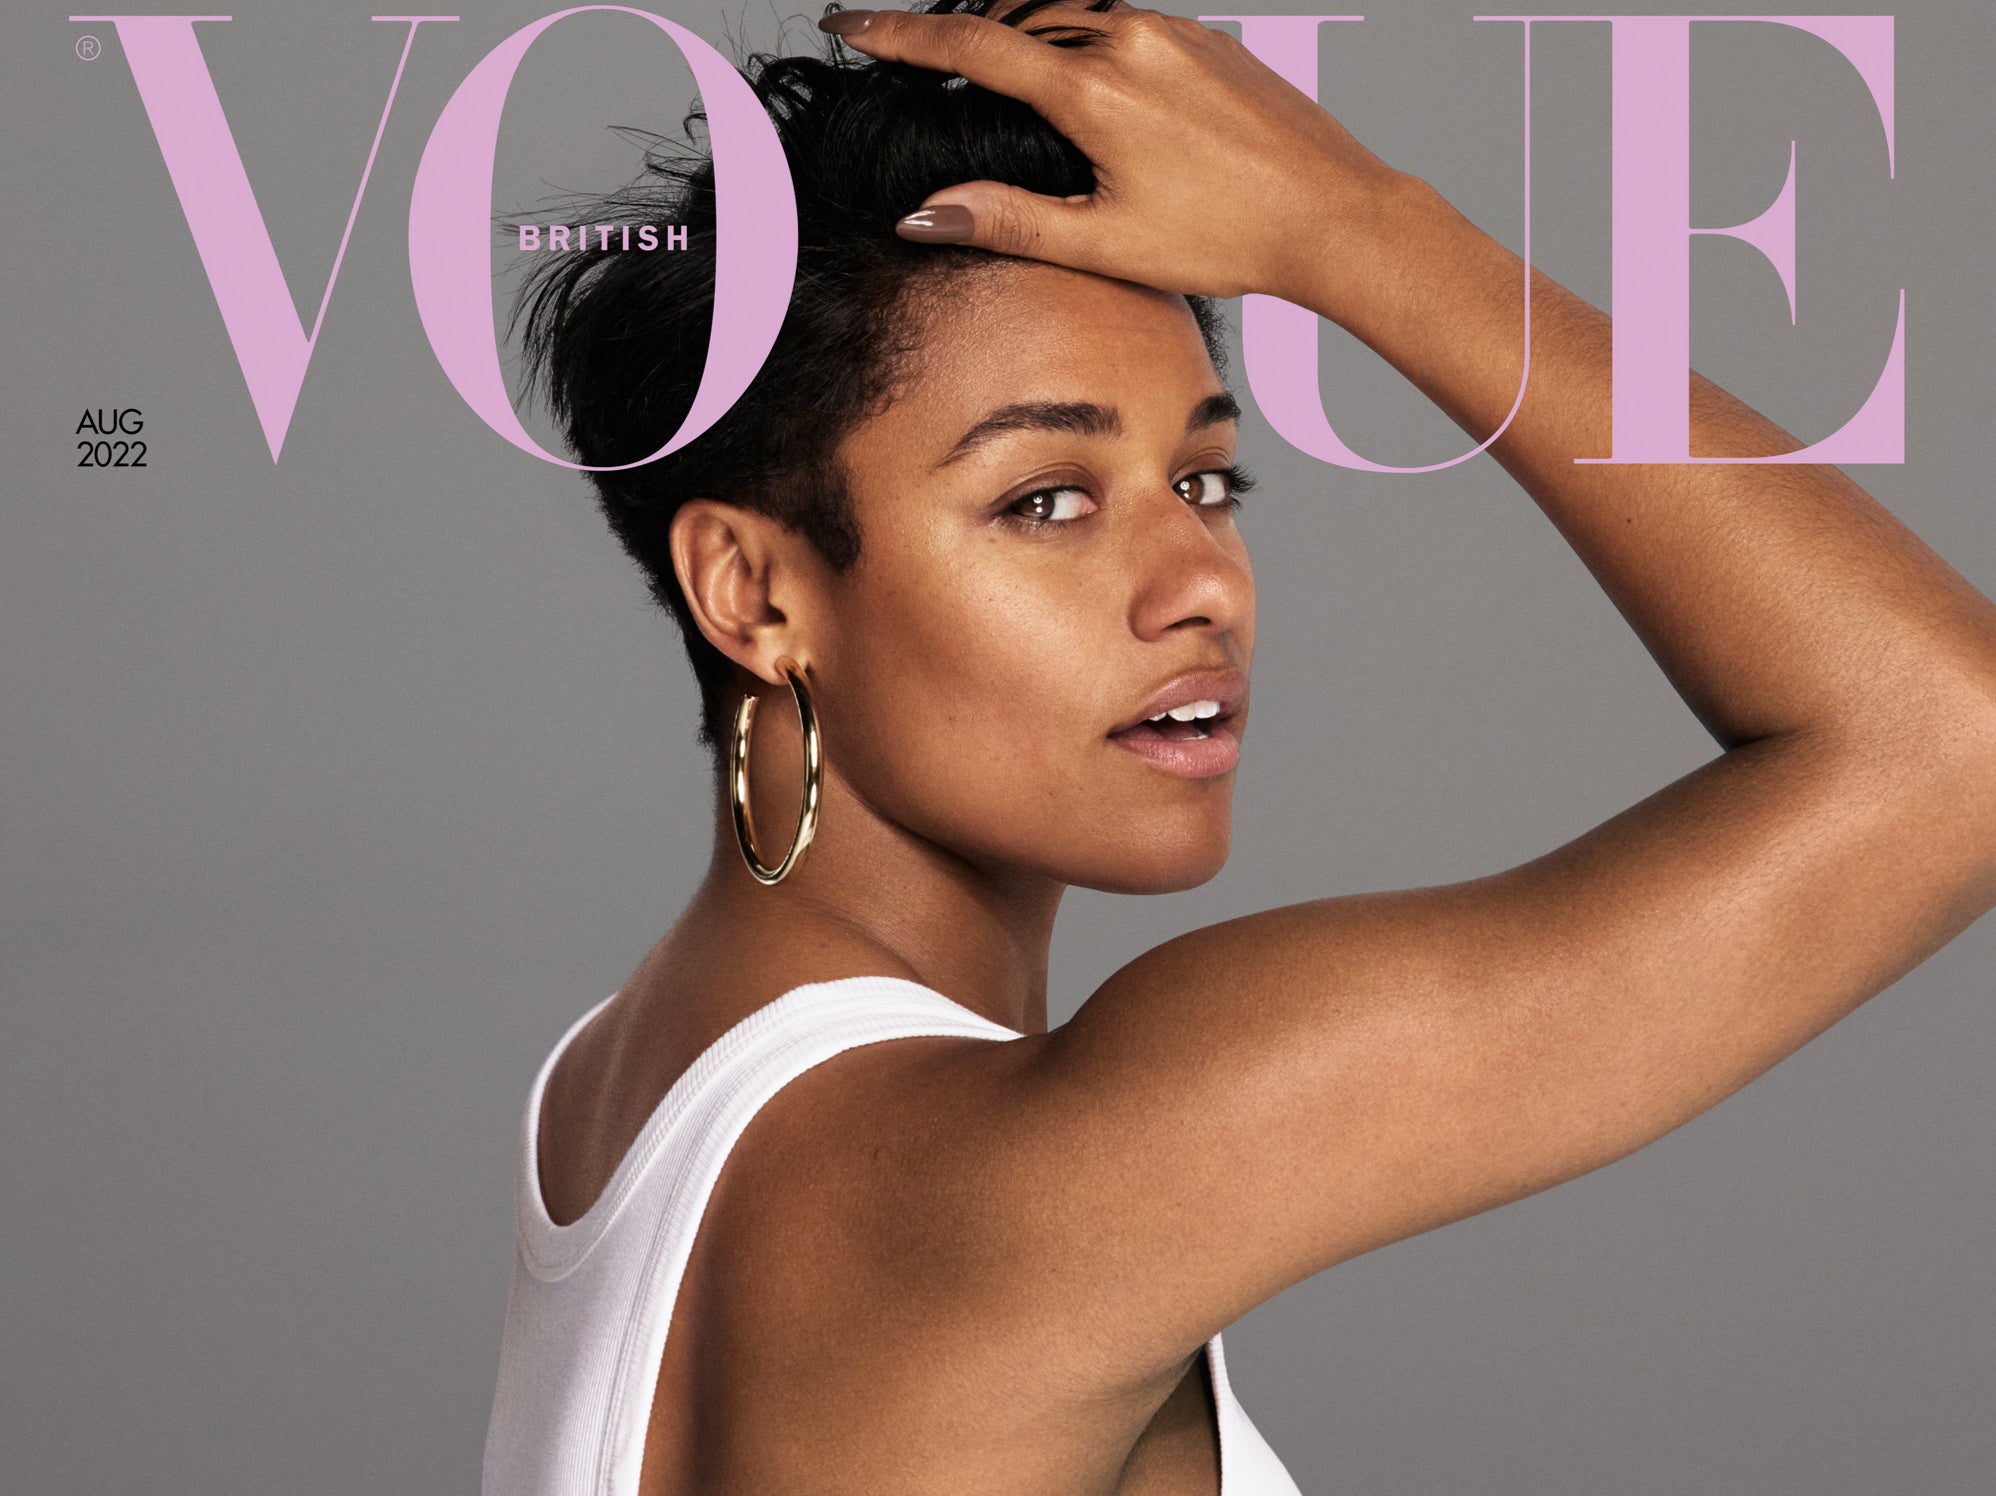 Ariana DeBose stars on the cover of British Vogue’s August Issue 2022